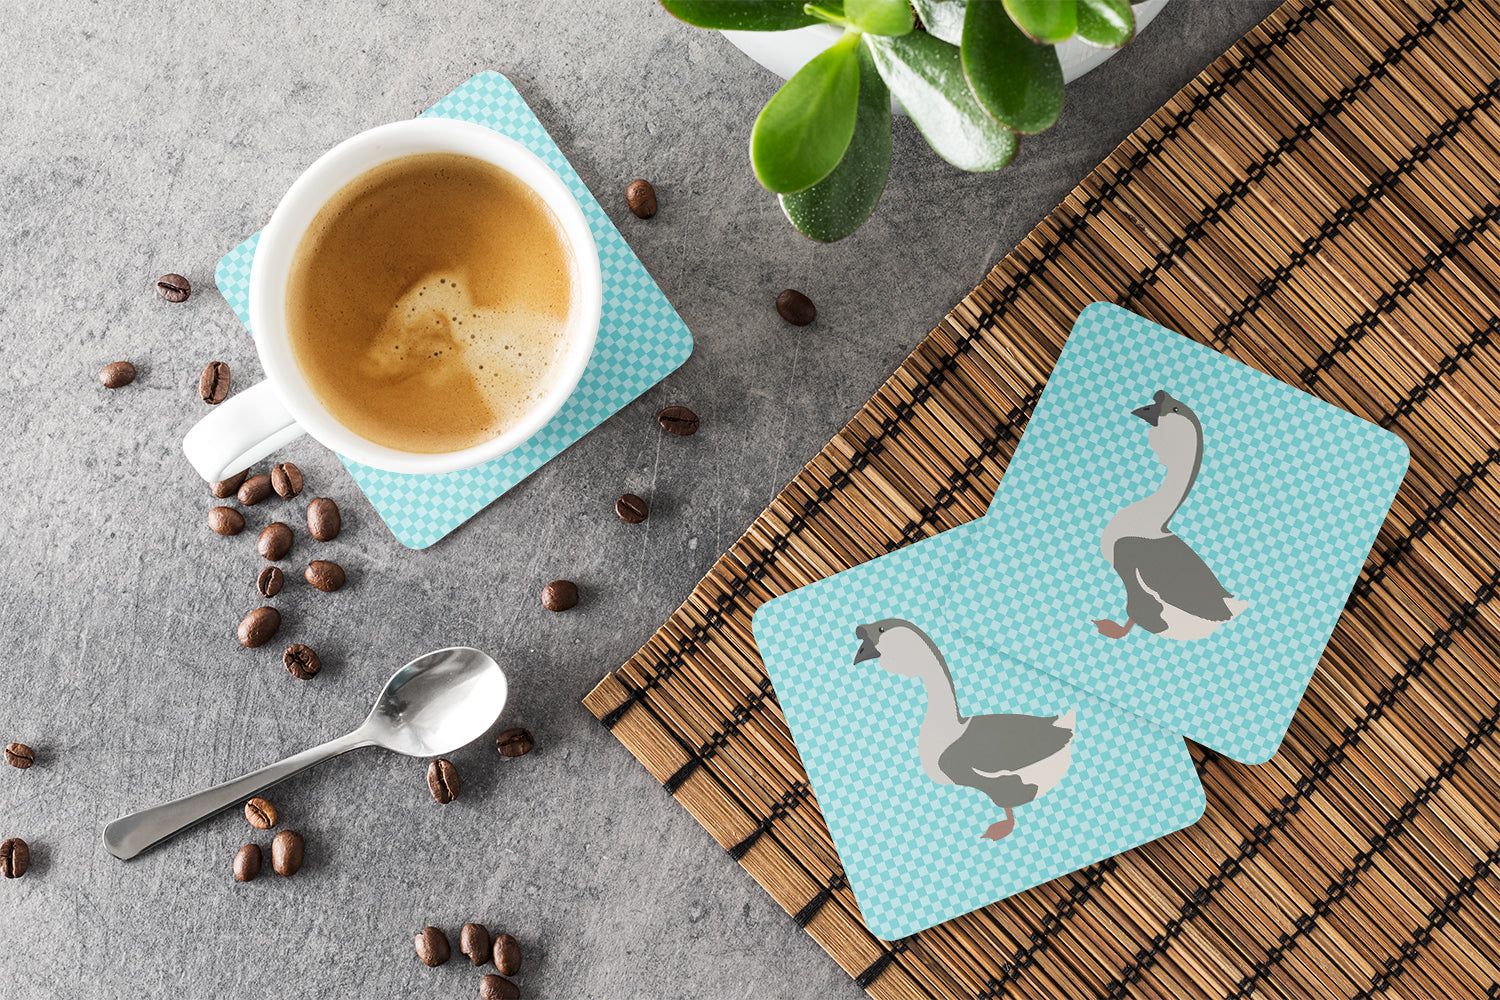 African Goose Blue Check Foam Coaster Set of 4 BB8073FC - the-store.com